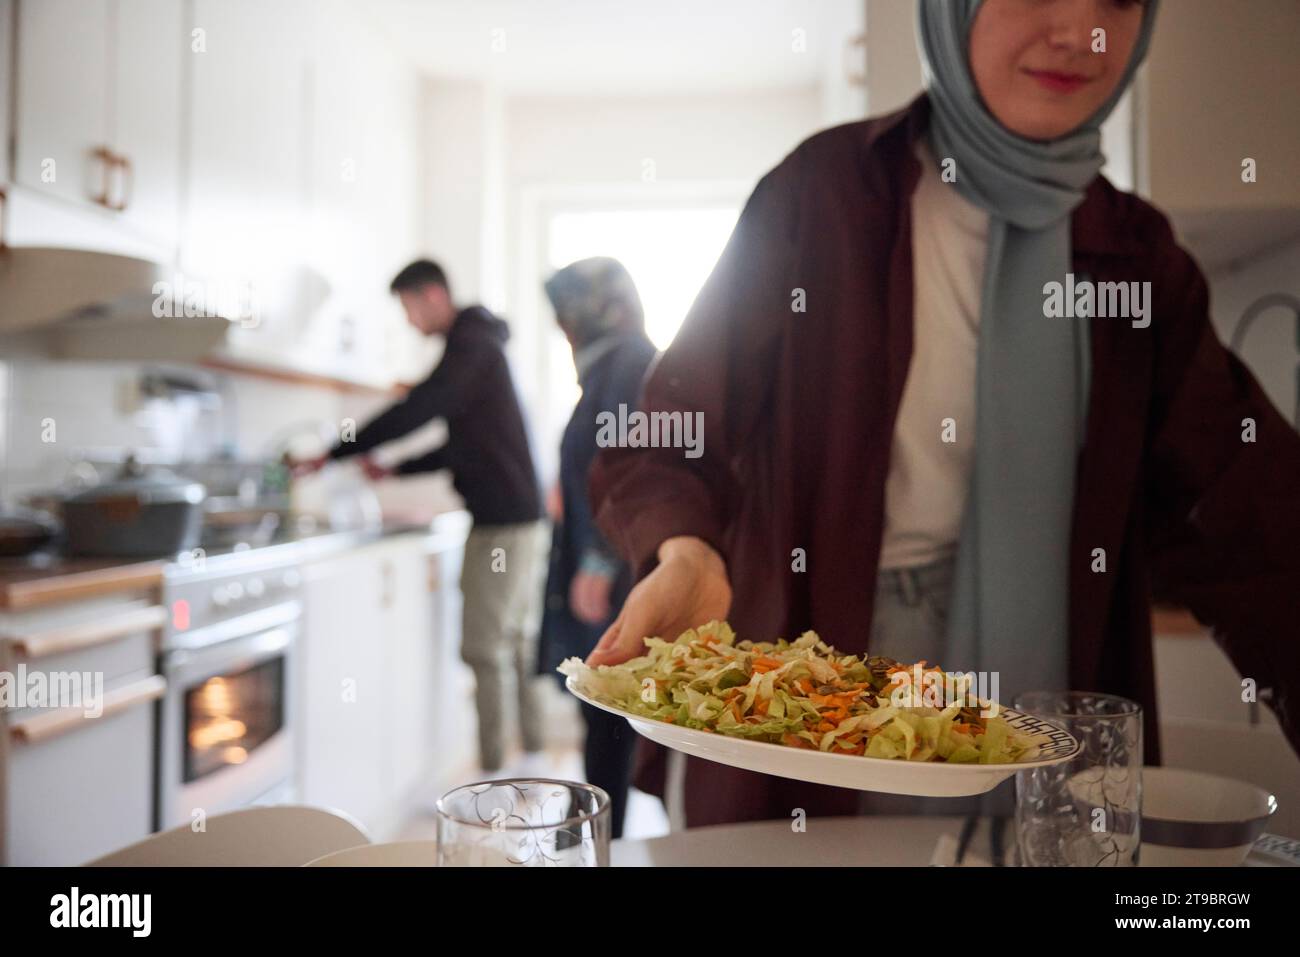 Family cooking together for eid al-fitr at home Stock Photo